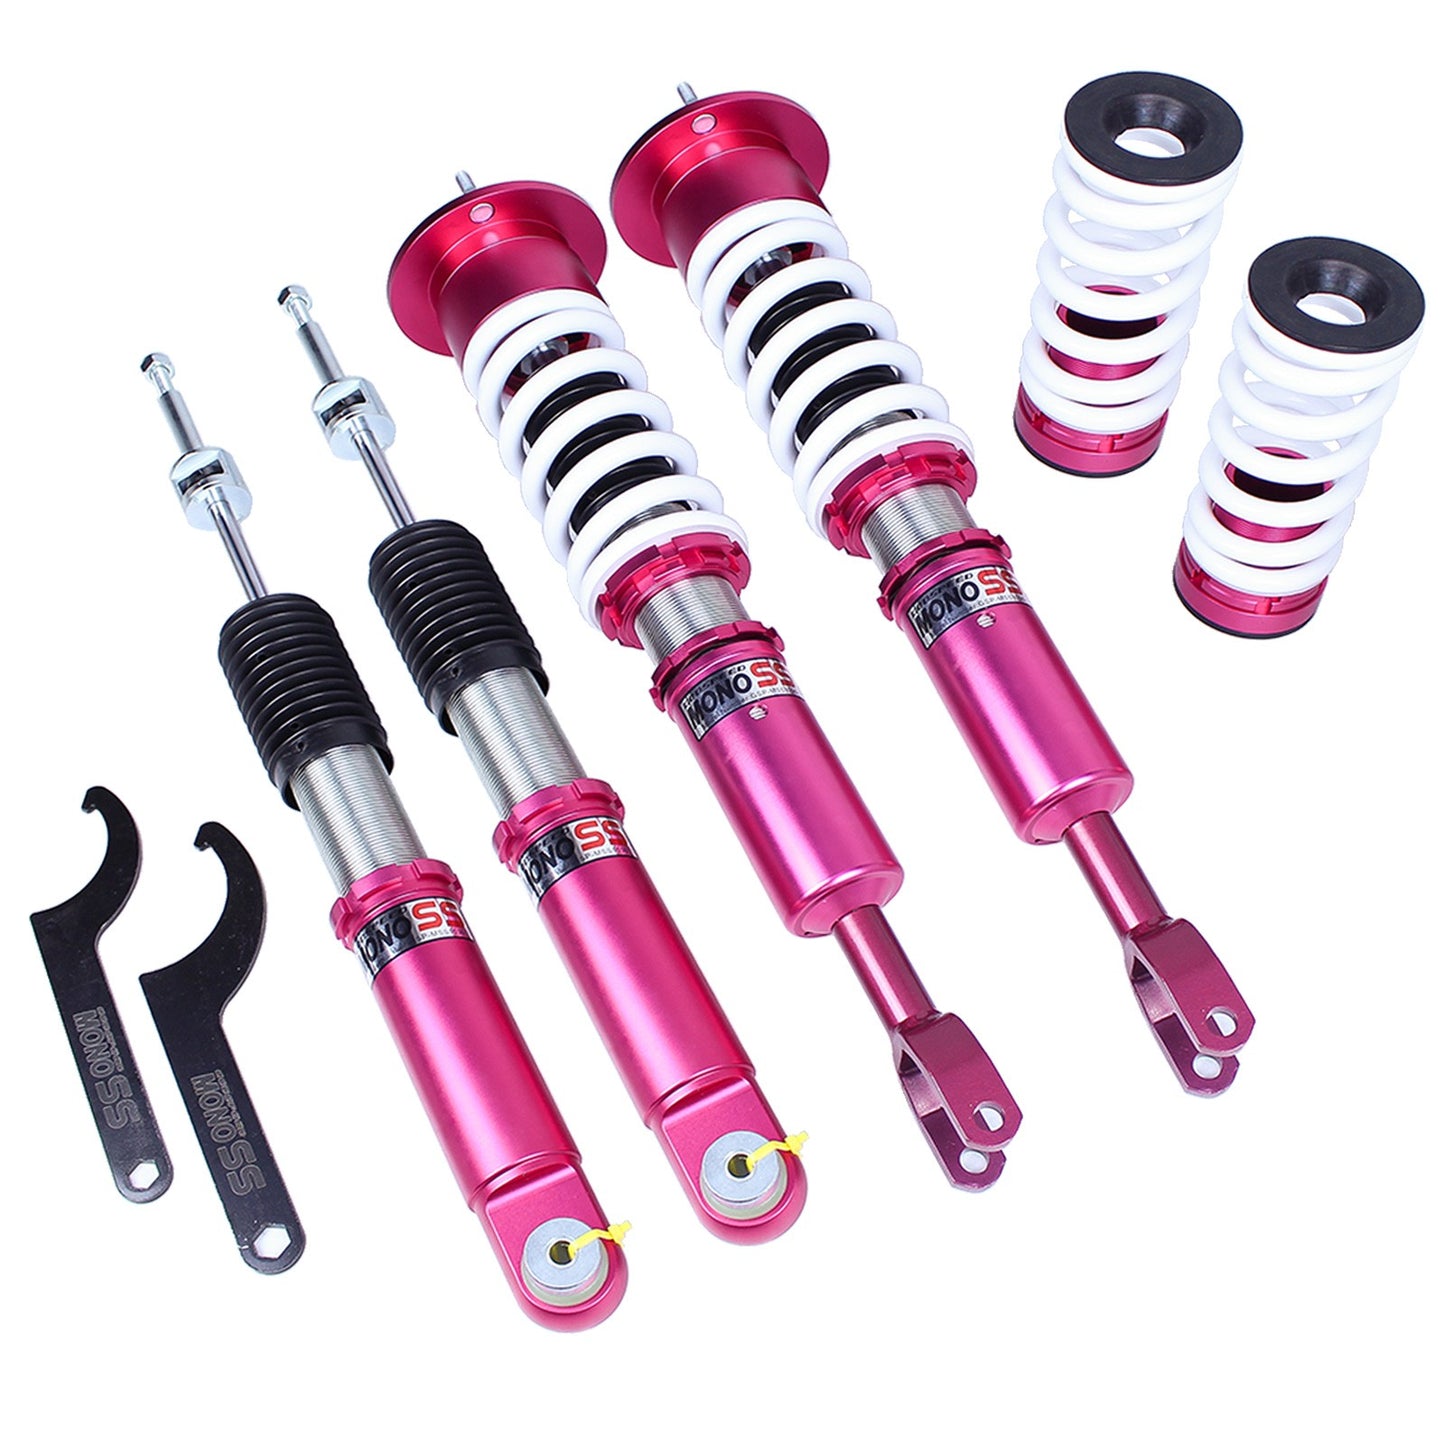 Godspeed Shock+Spring 16way Suspension Coilover MonoSS for Audi A6 C5 97-04 FWD